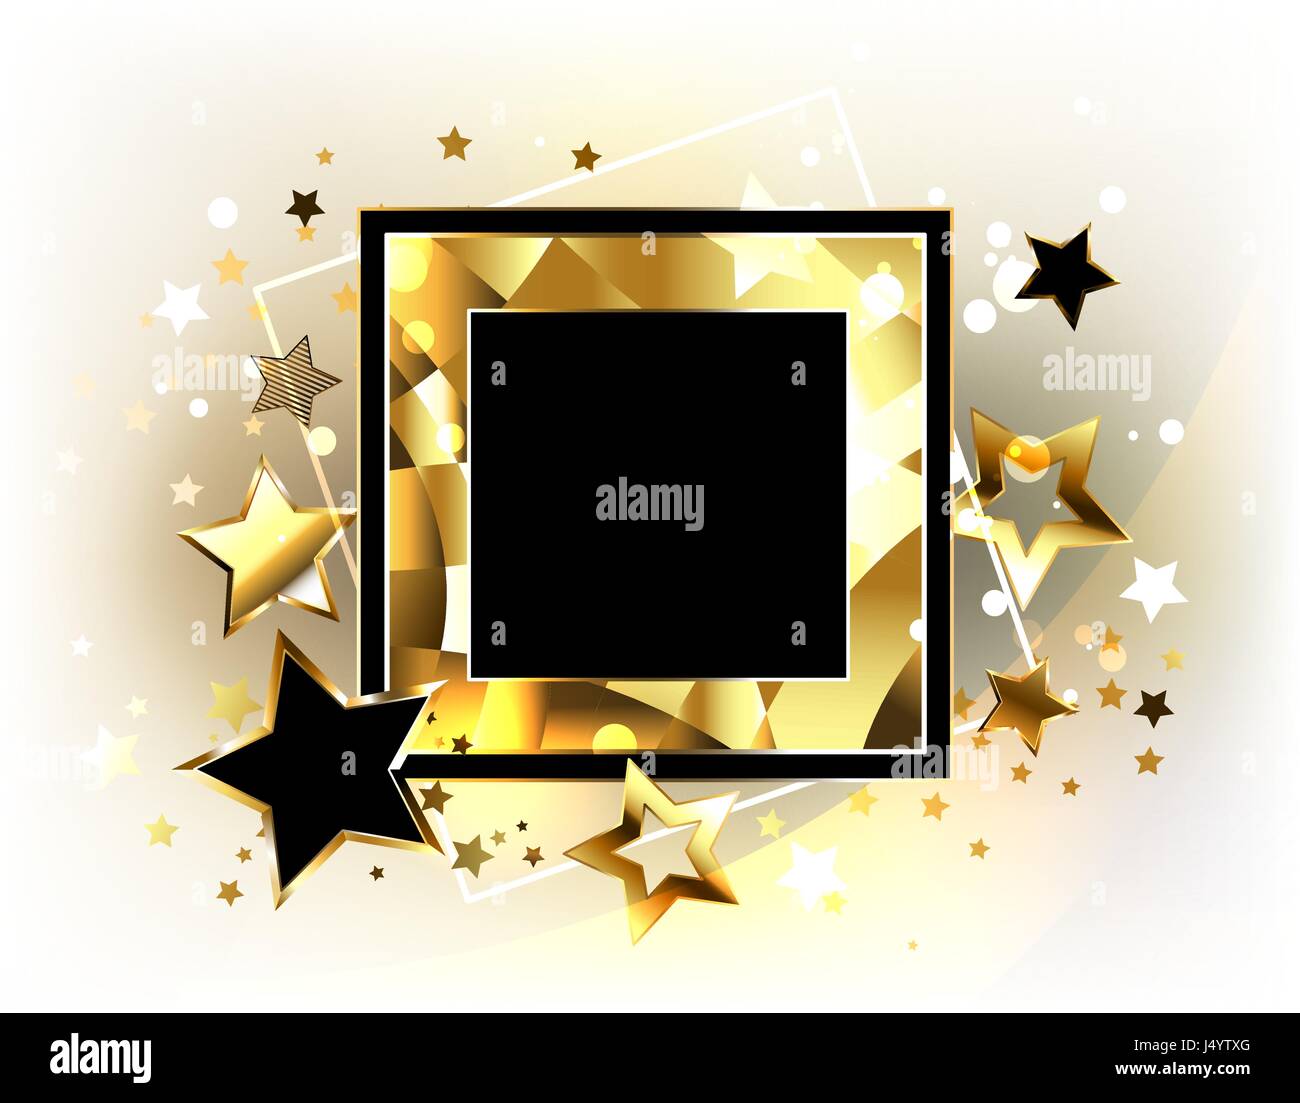 Square black banner with a gold polygonal frame, decorated with flying, gold and black stars on a light background. Design with gold stars. Stock Vector